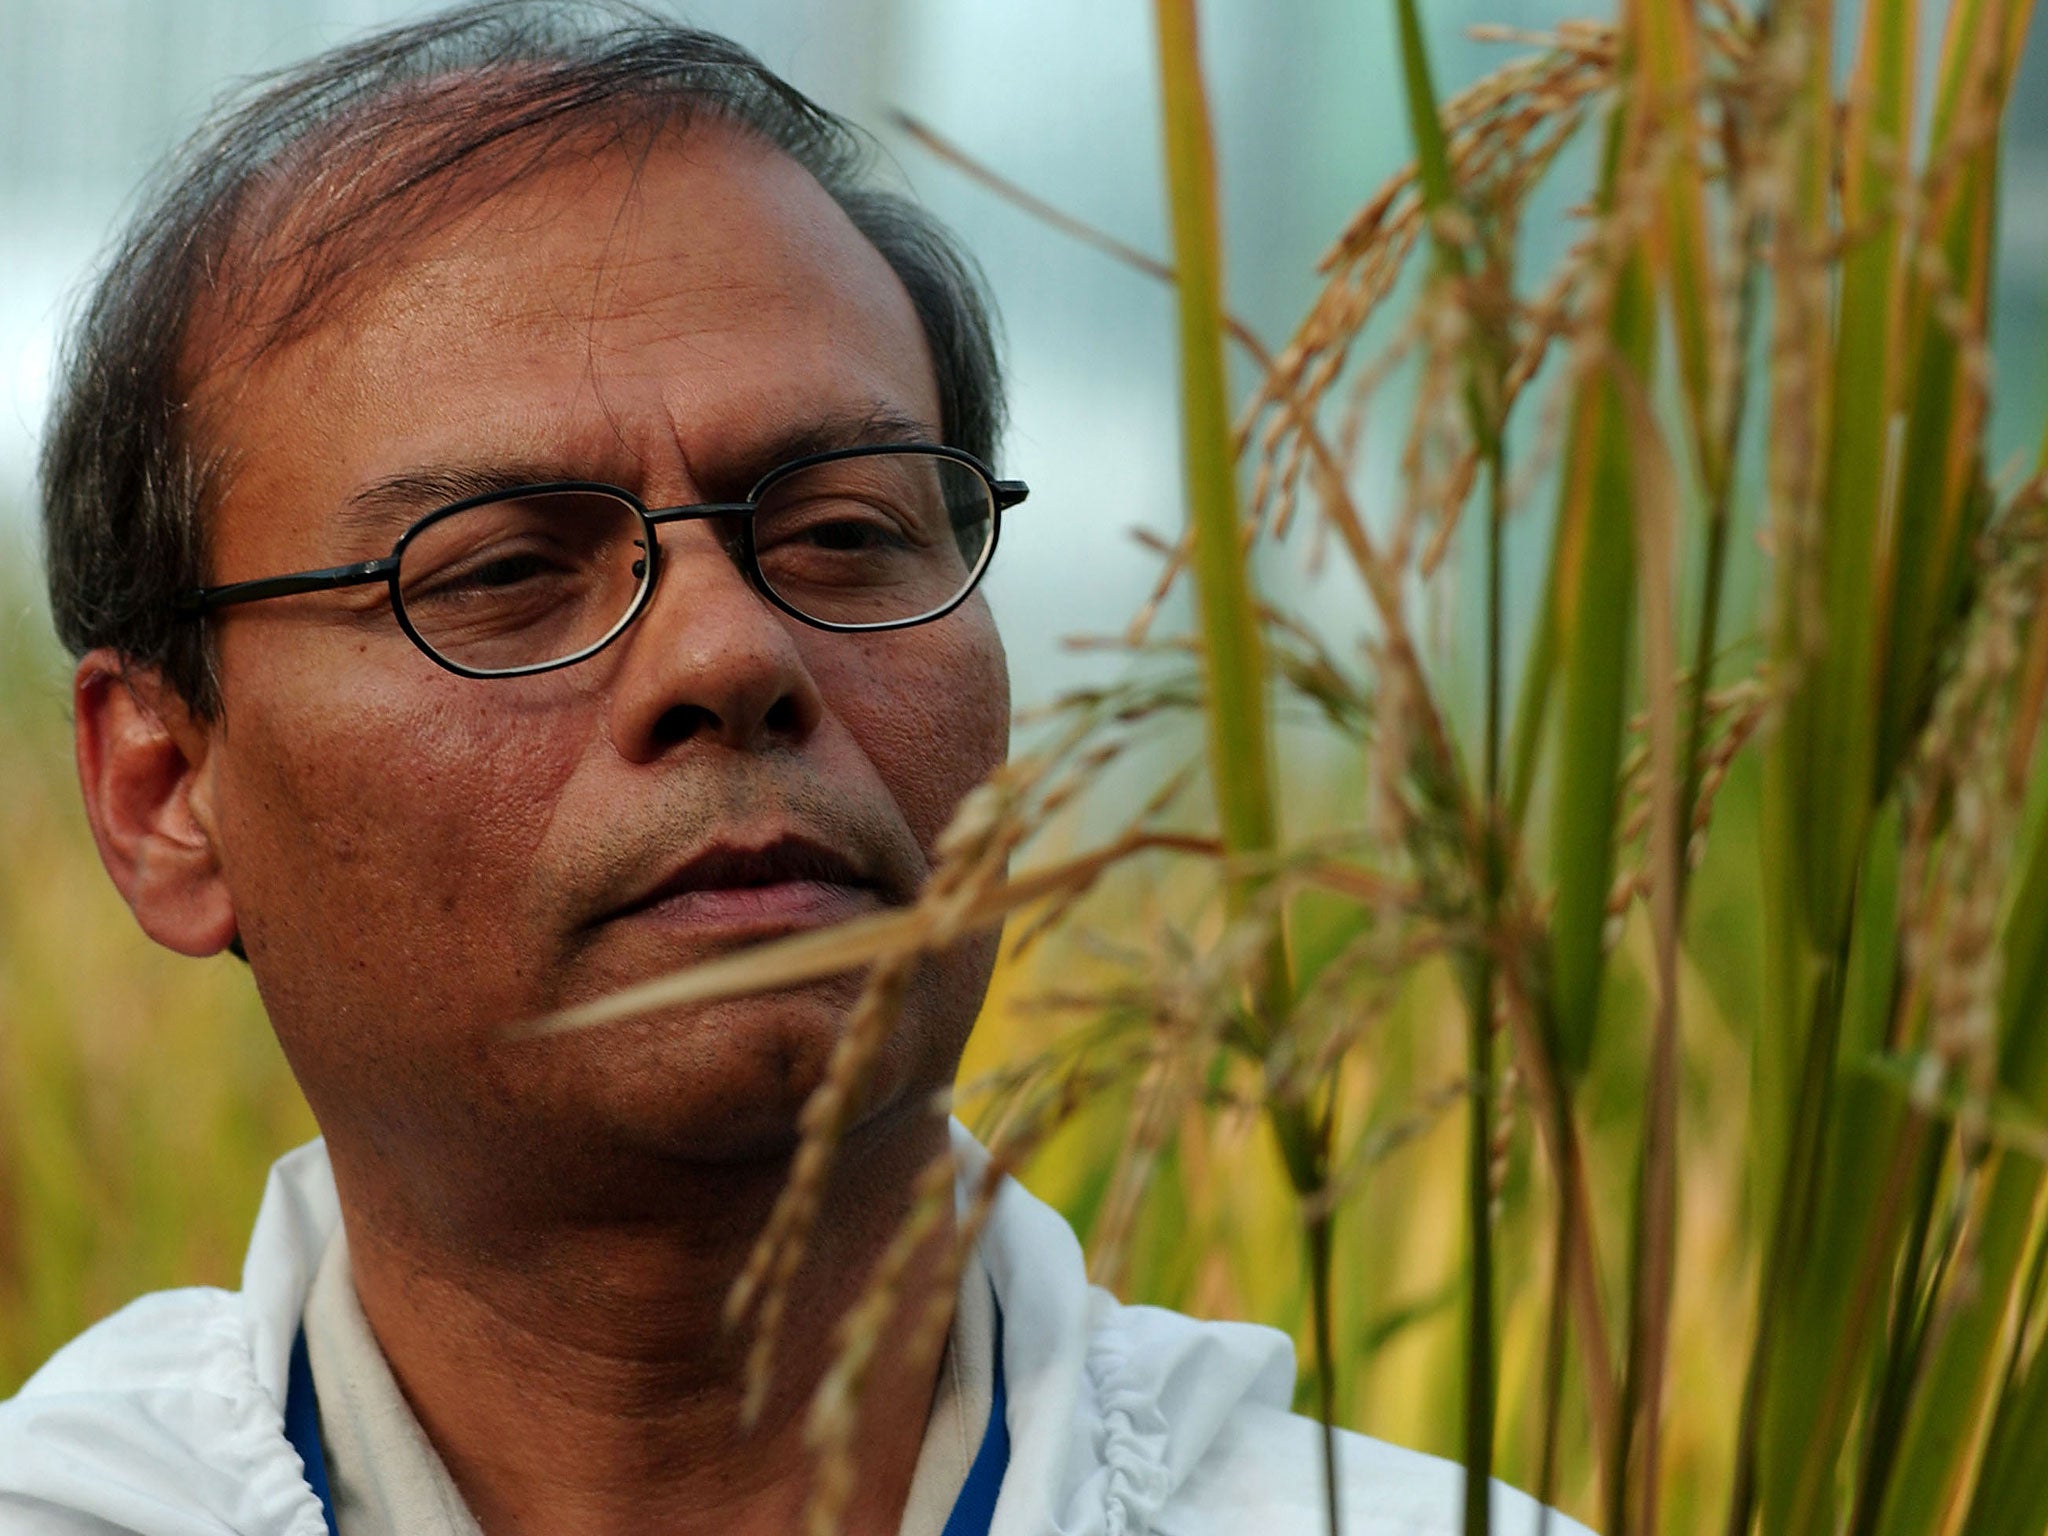 Plant Biotechnologist Dr. Swapan Datta inspects a genetically modified 'Golden Rice' plant